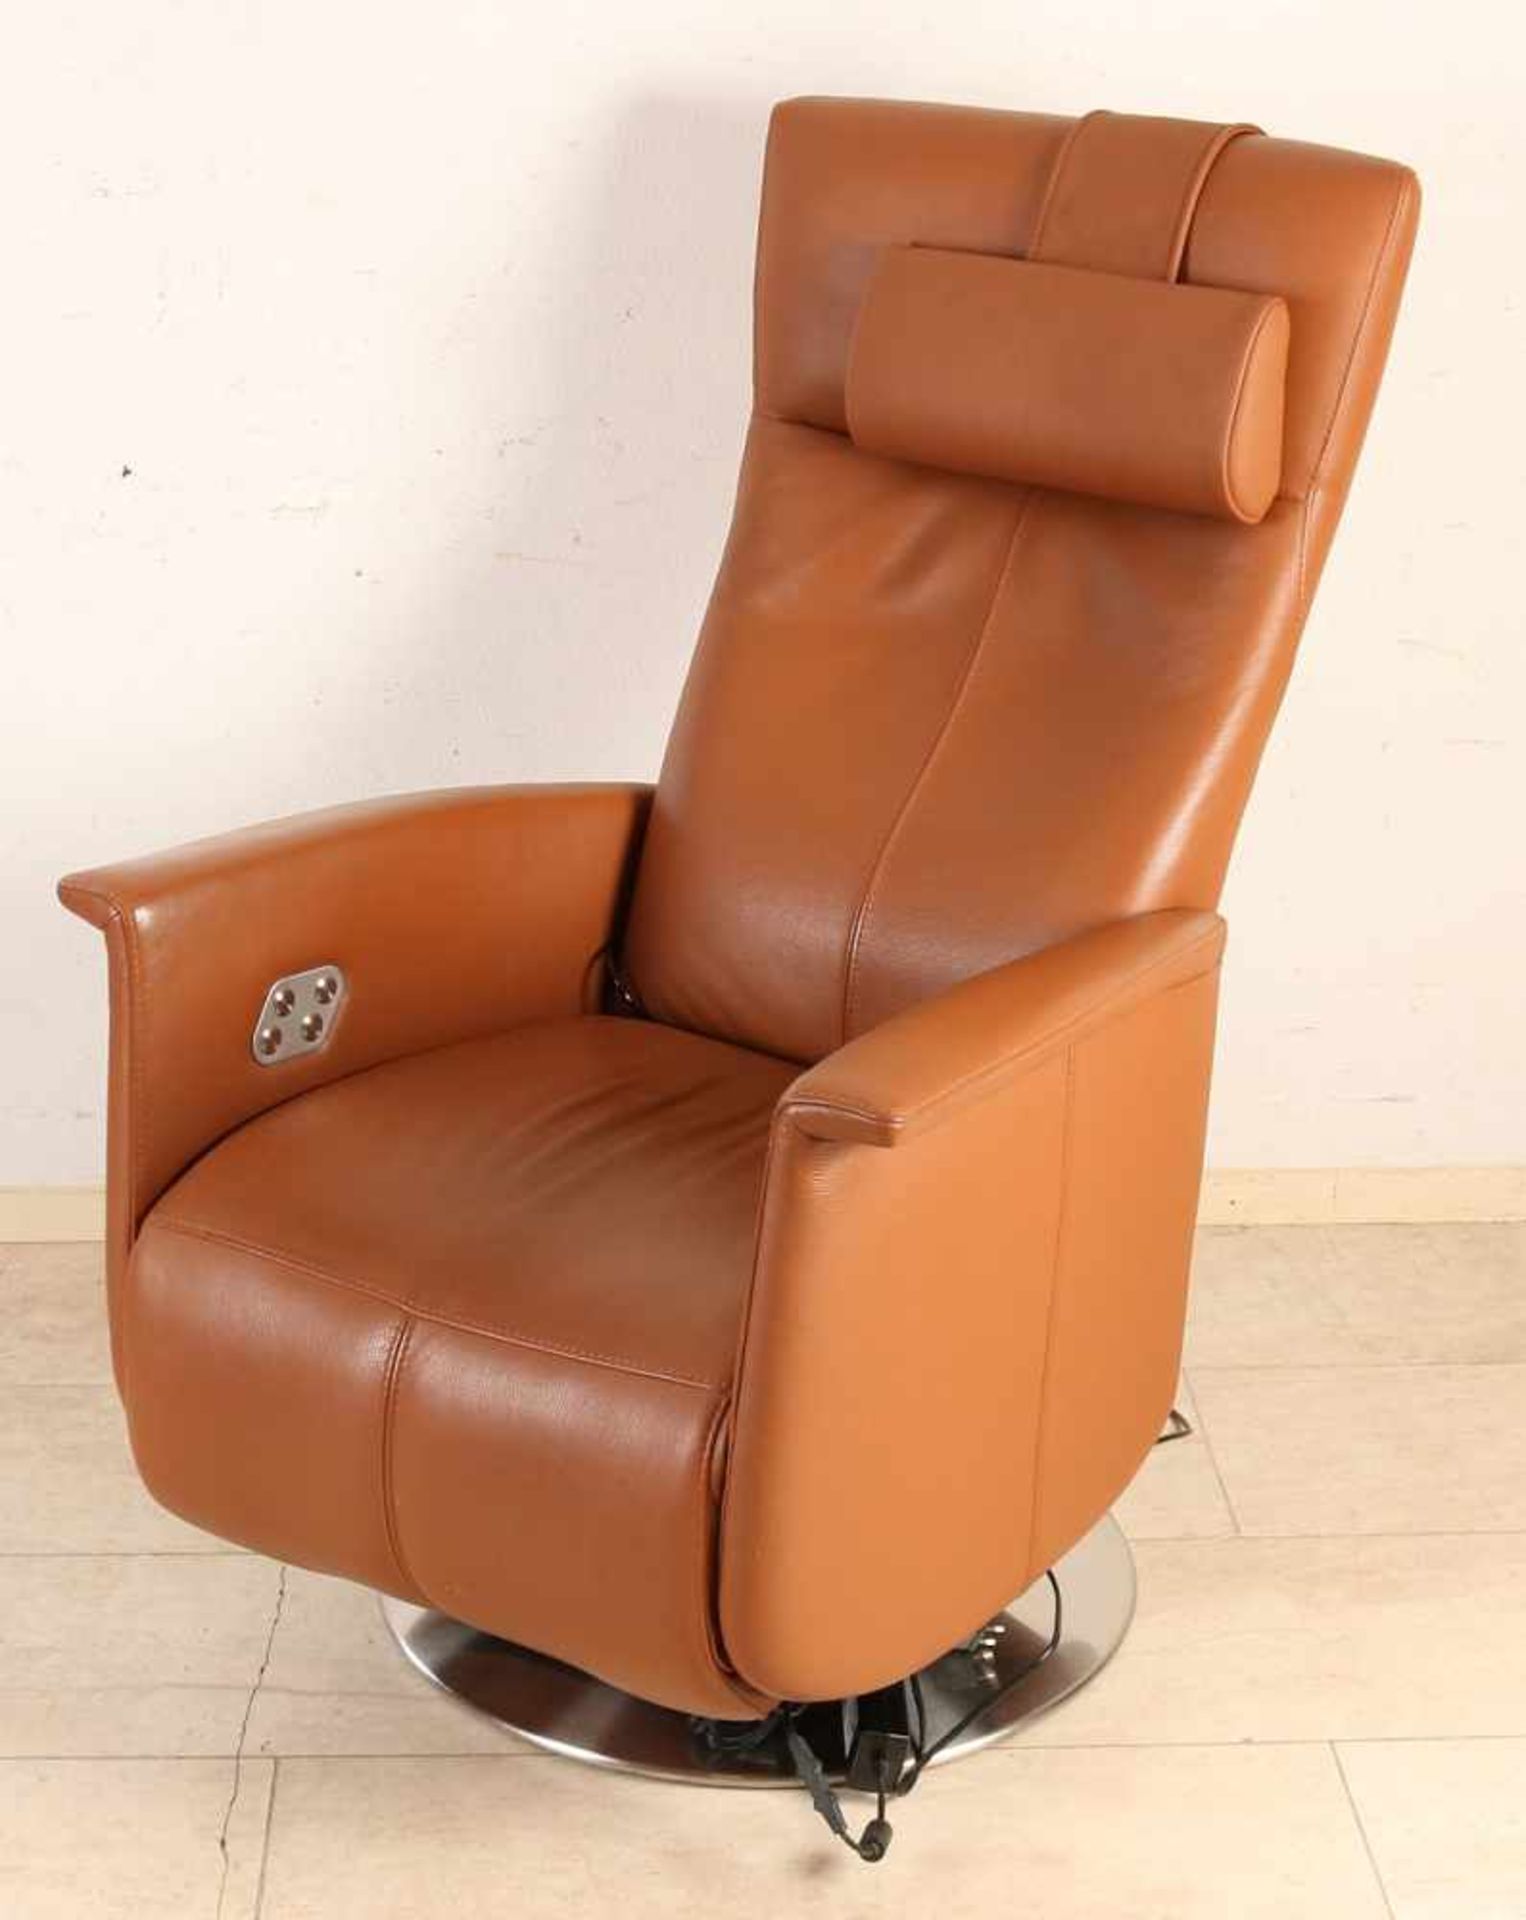 Brown leather rebel-chair with electrical operation. Equipped with heavy aluminum foot. Second